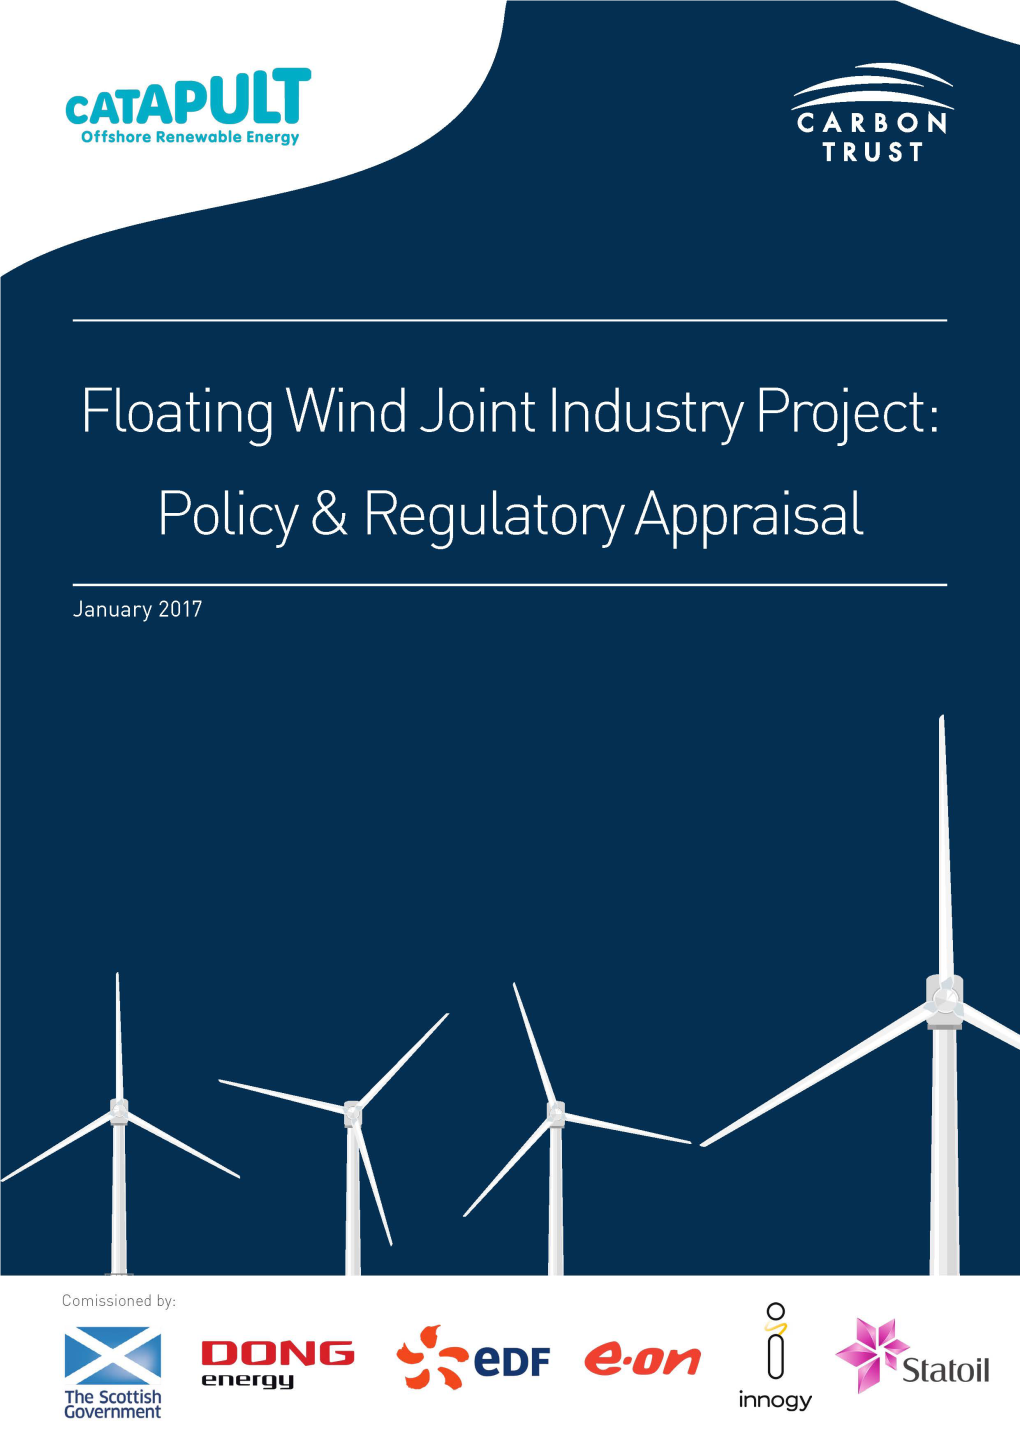 Floating Wind Joint Industry Project Policy and Regulatory Appraisal